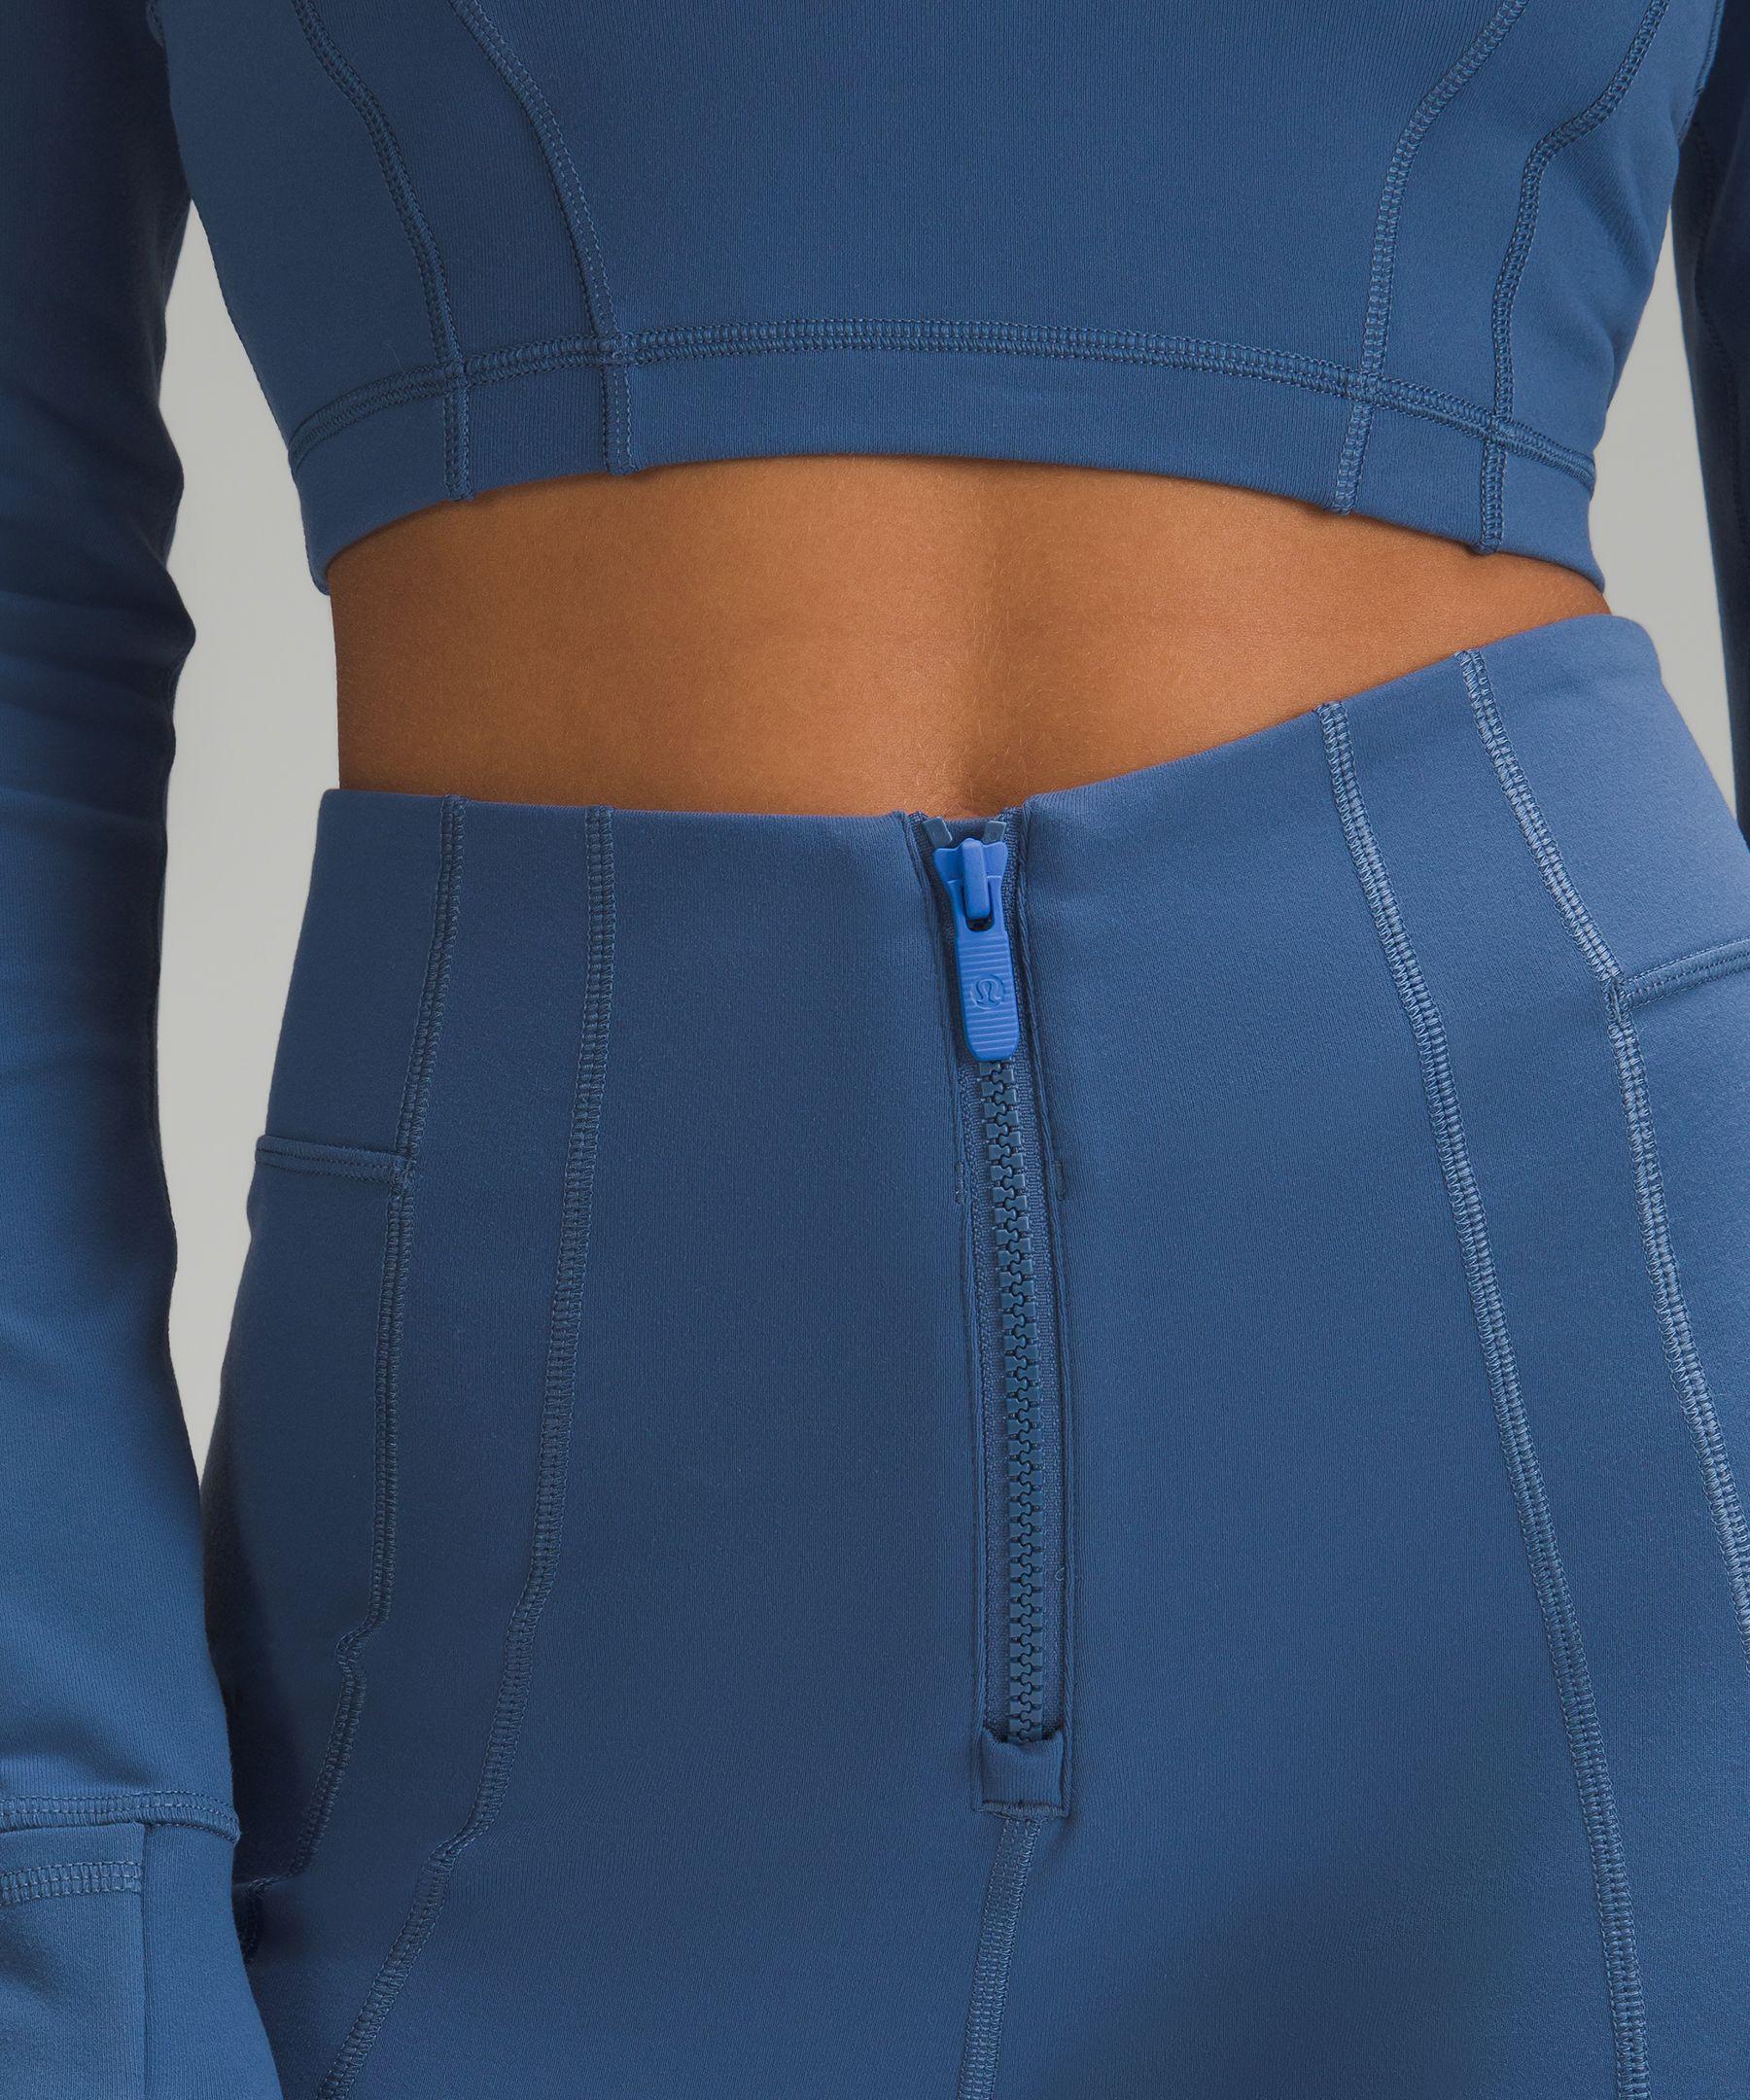 Lululemon Navy Blue Front Zippers with Mesh Hem and Waist Band